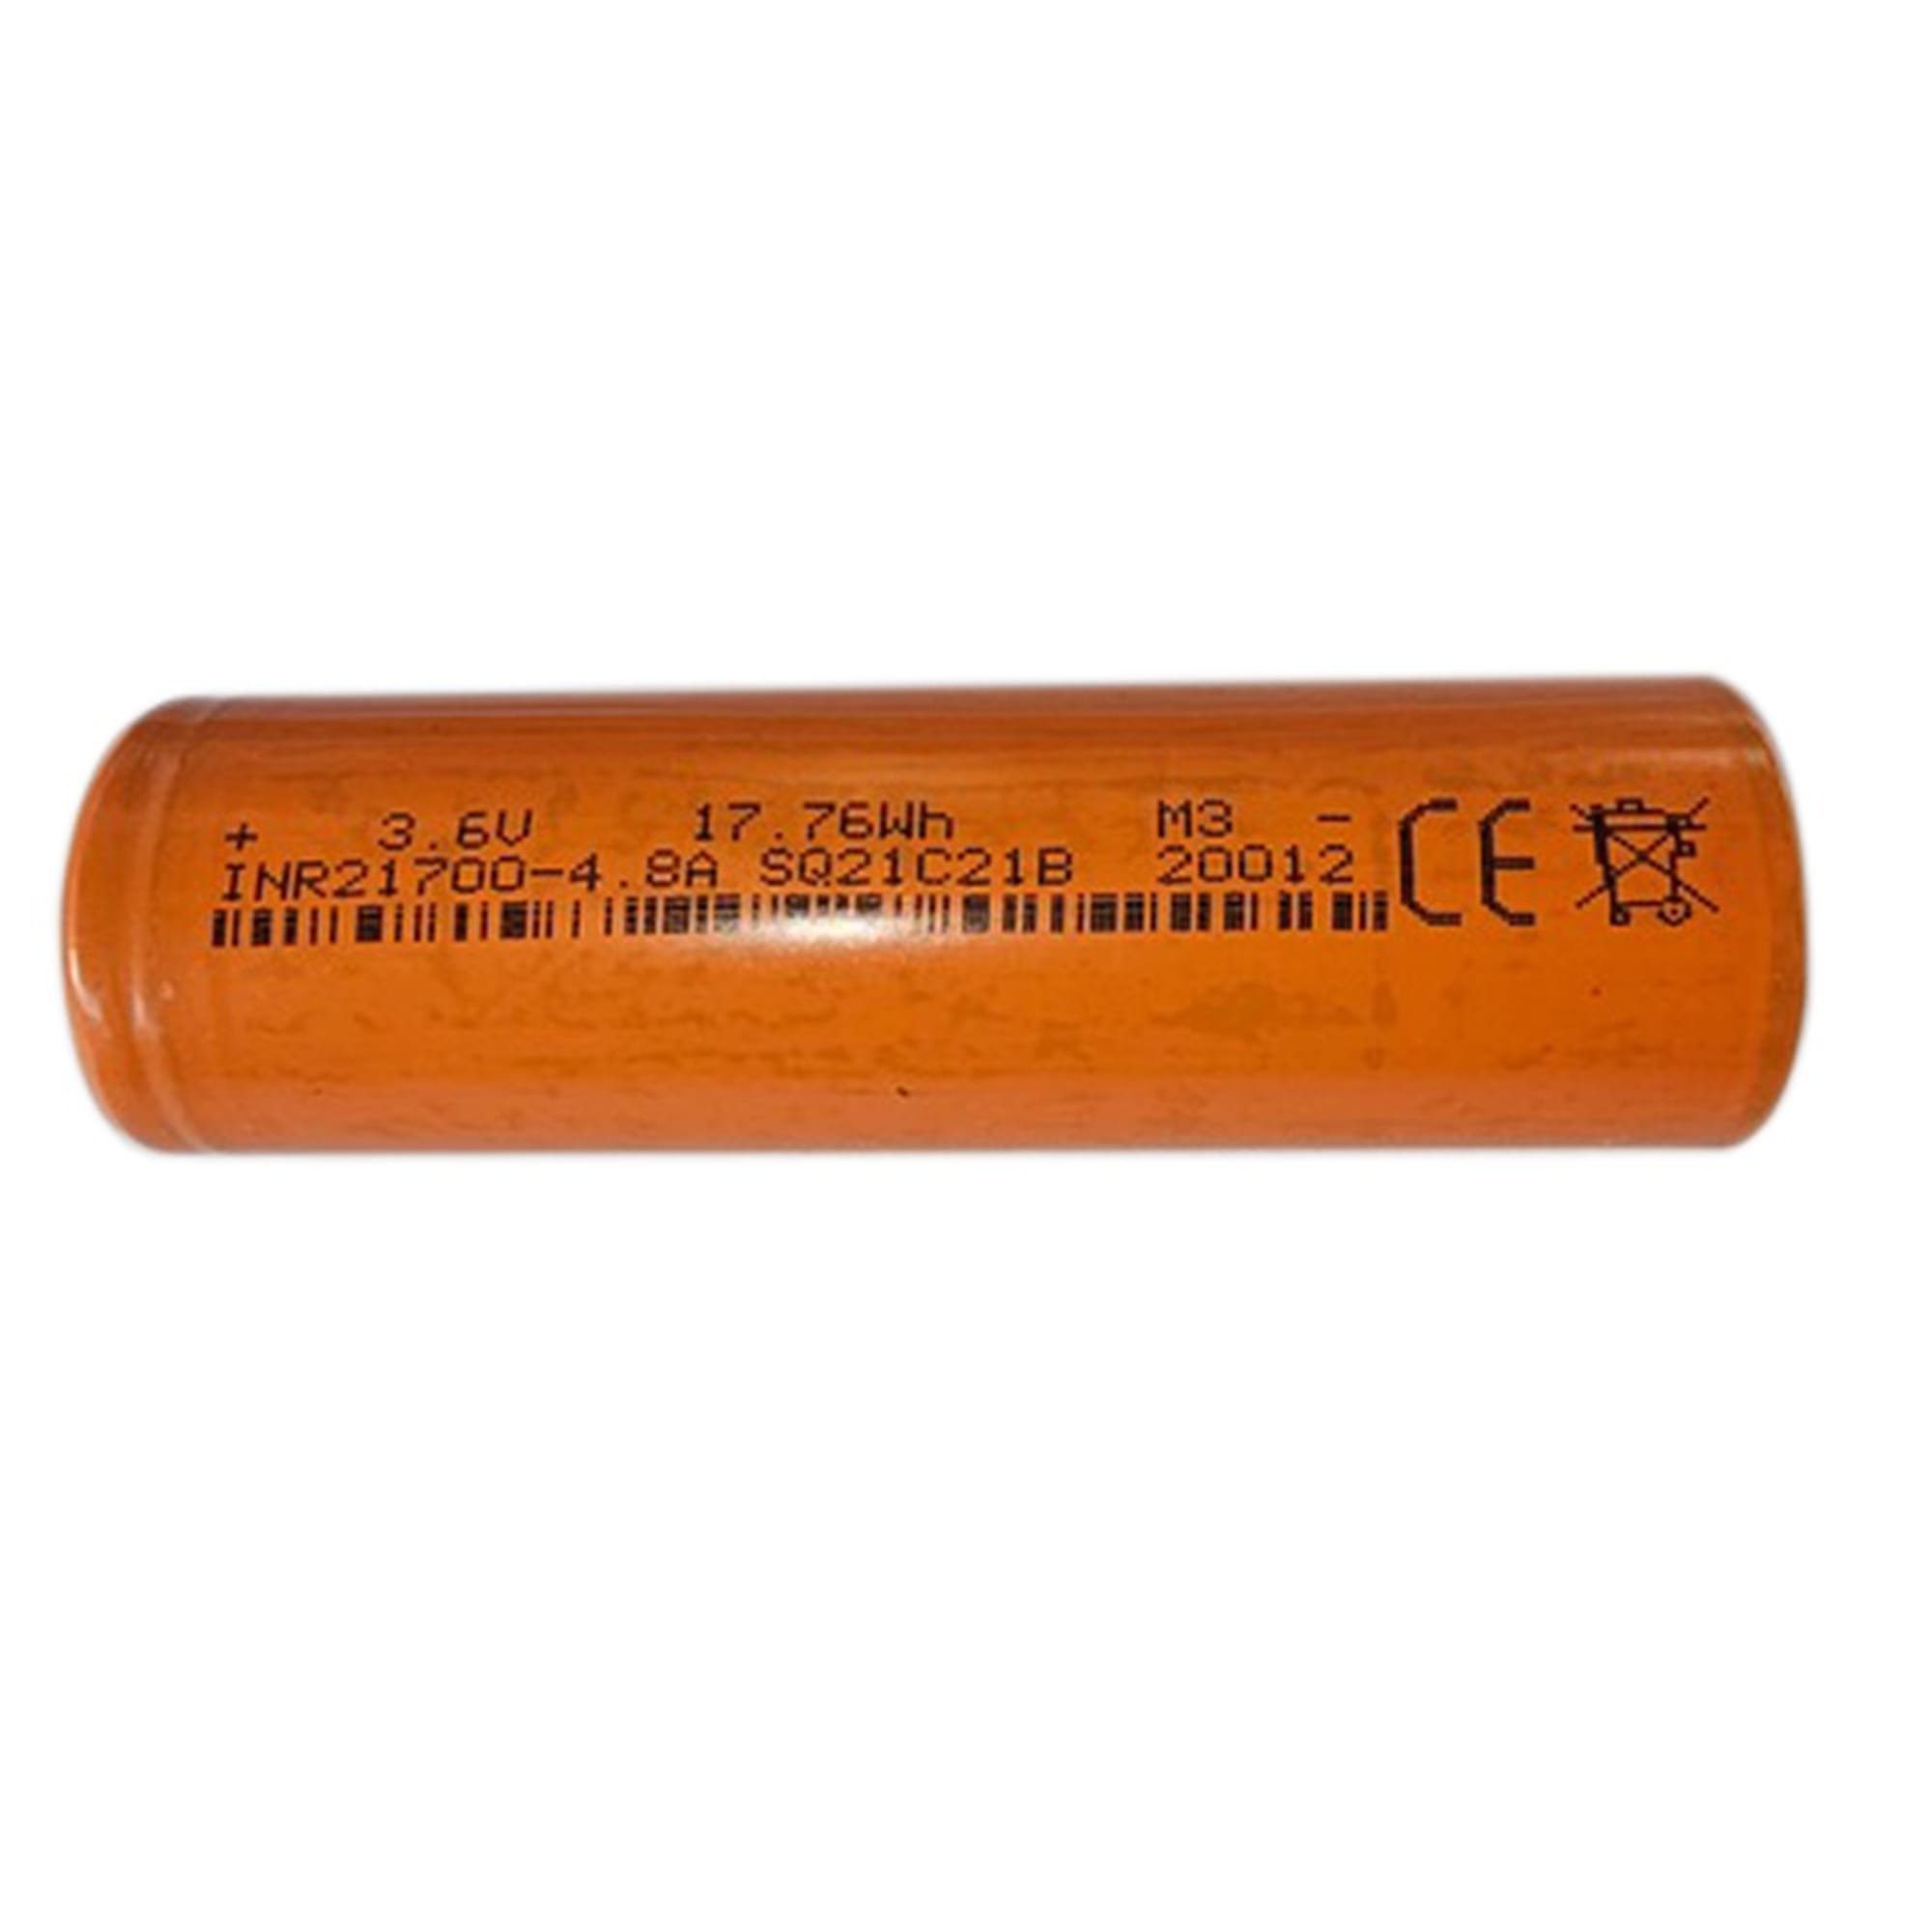 Rechargeable spare Li-Ion battery (5000 mAh) for BLUE SHARK Cutter, image 2